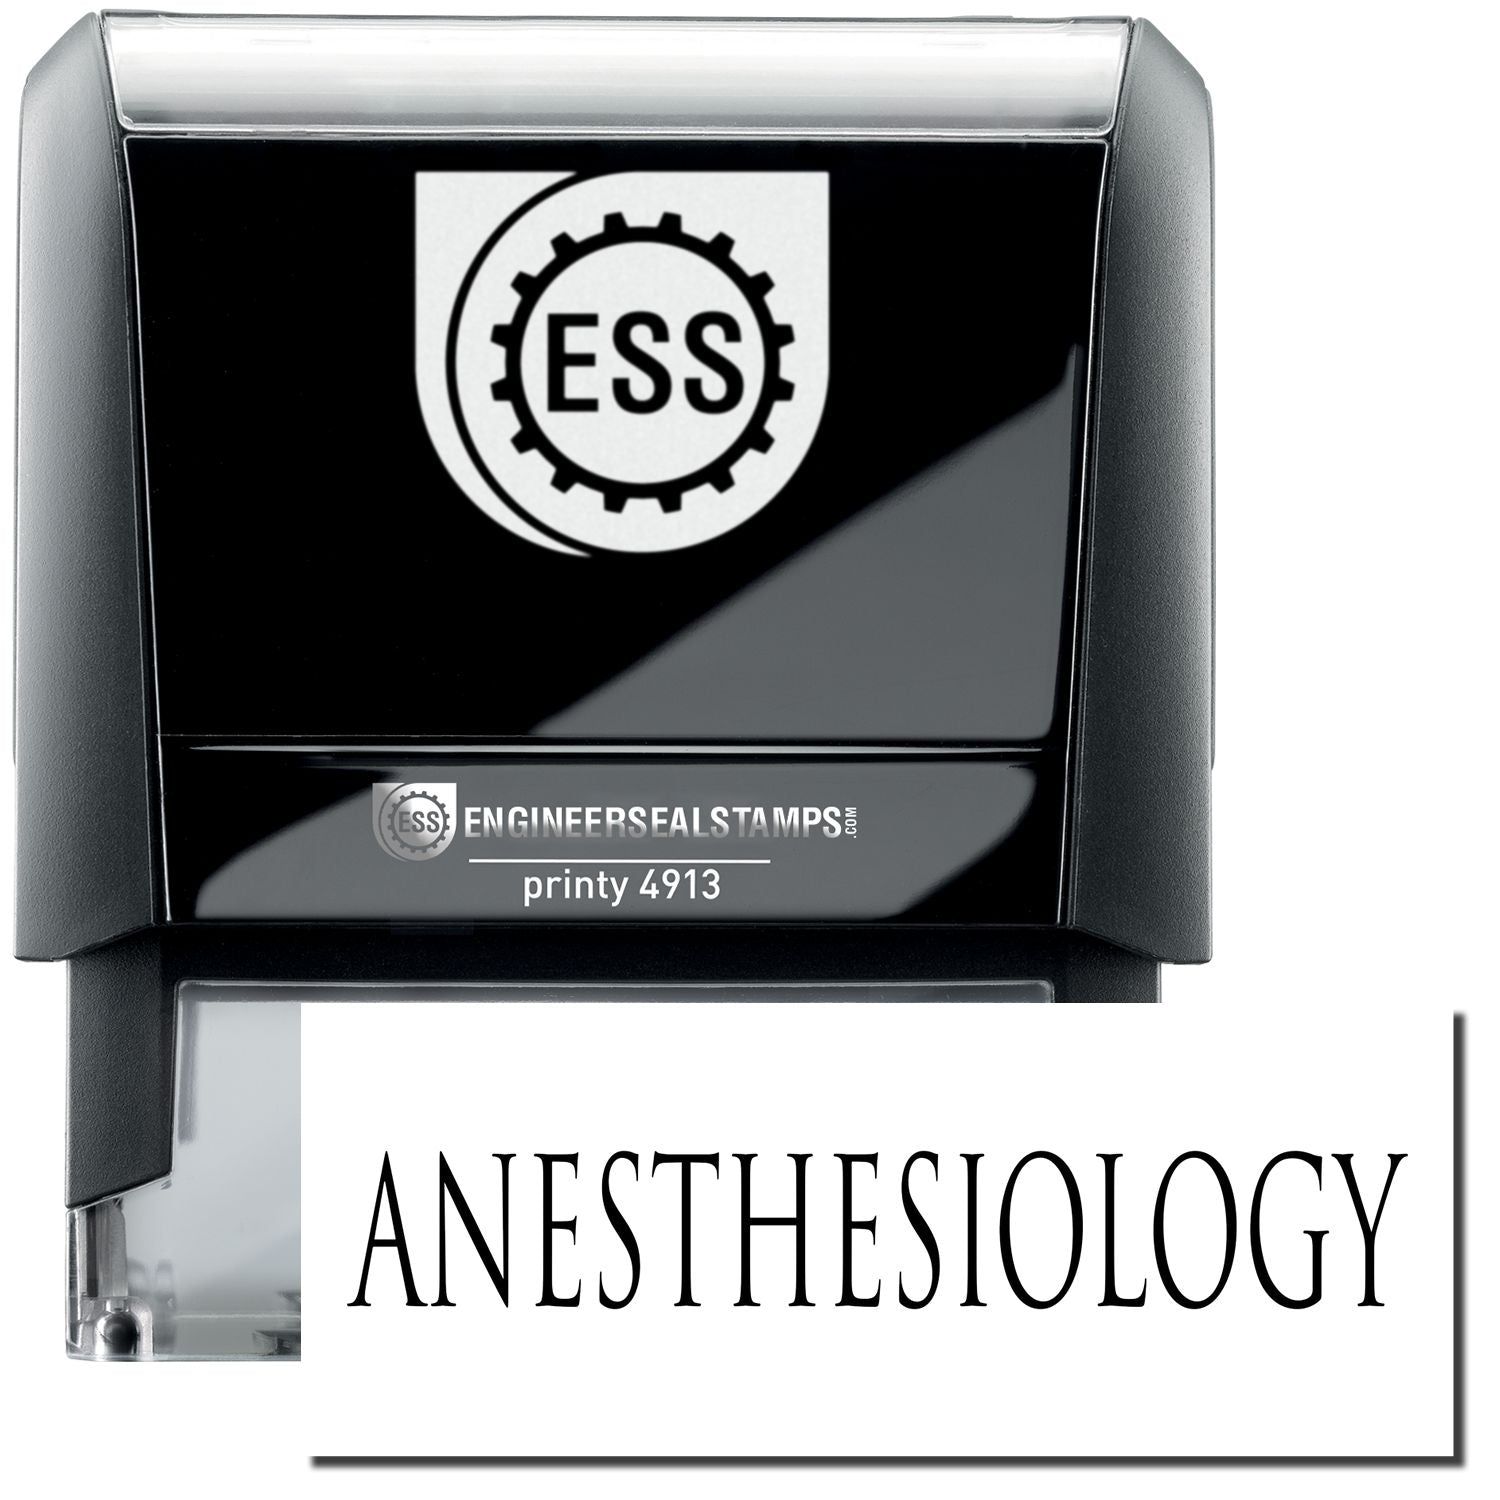 A self-inking stamp with a stamped image showing how the text "ANESTHESIOLOGY" in a large font is displayed by it.